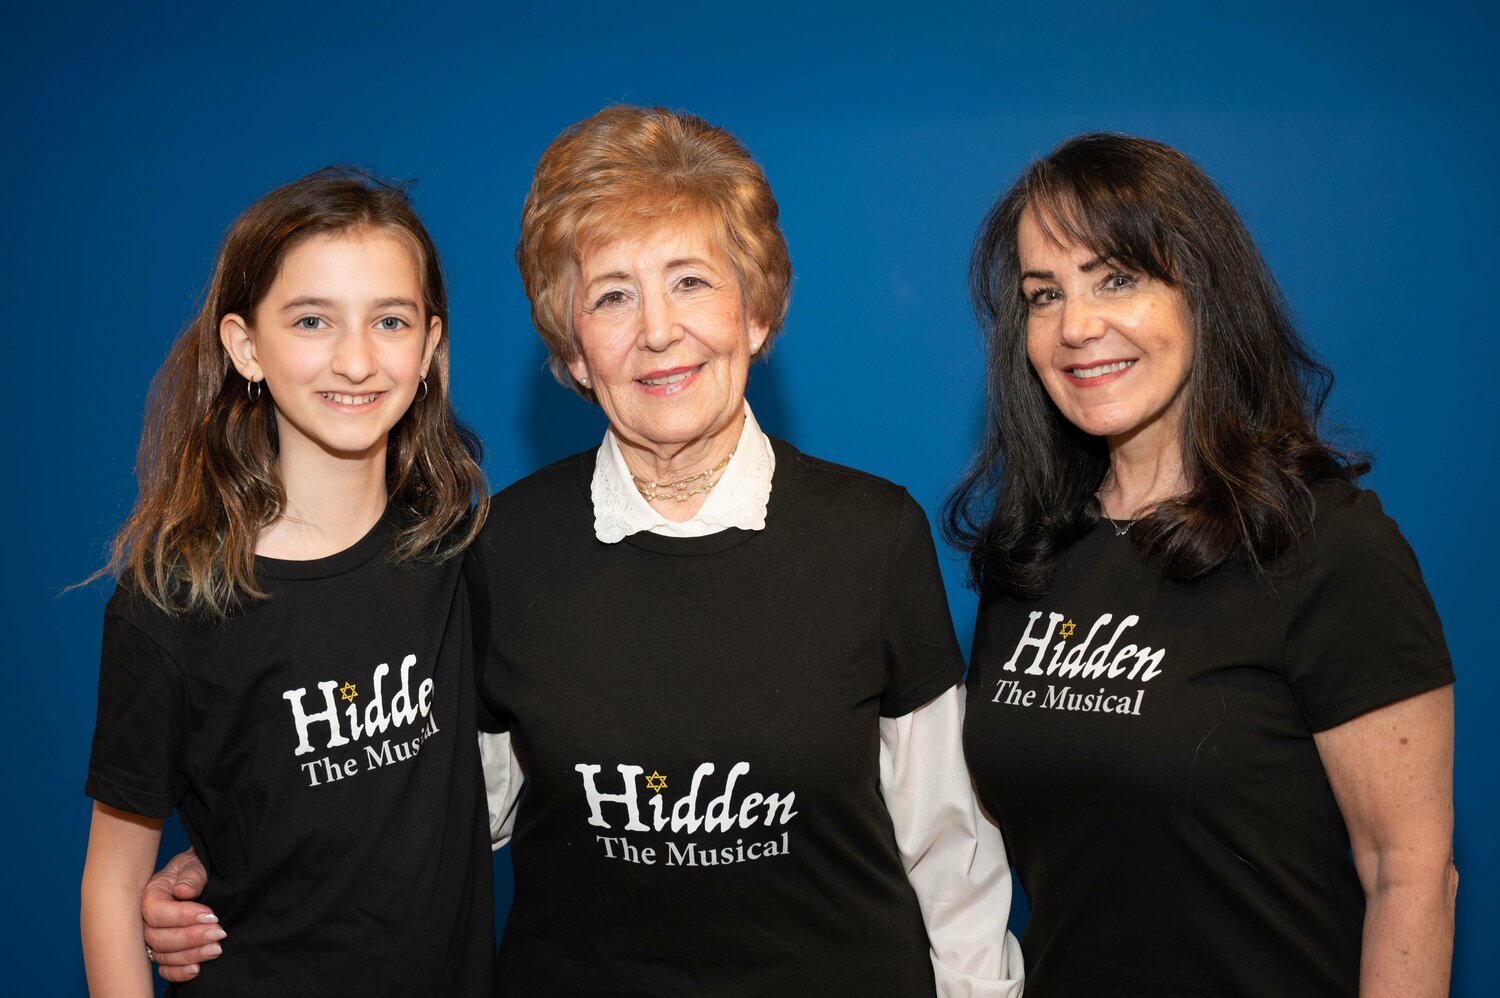 Ruth Kapp Hartz, center, survived the Holocaust as a Jewish child in Nazi-occupied France. Now the Jenkintown resident’s 1994-memoir has formed the basis of “Hidden” a musical production getting its premiere this weekend in Montgomery County. Here, she poses with the two actresses who portray her, Sydney Zimney and Linda Glazerman Roeder, who lives in Feasterville.